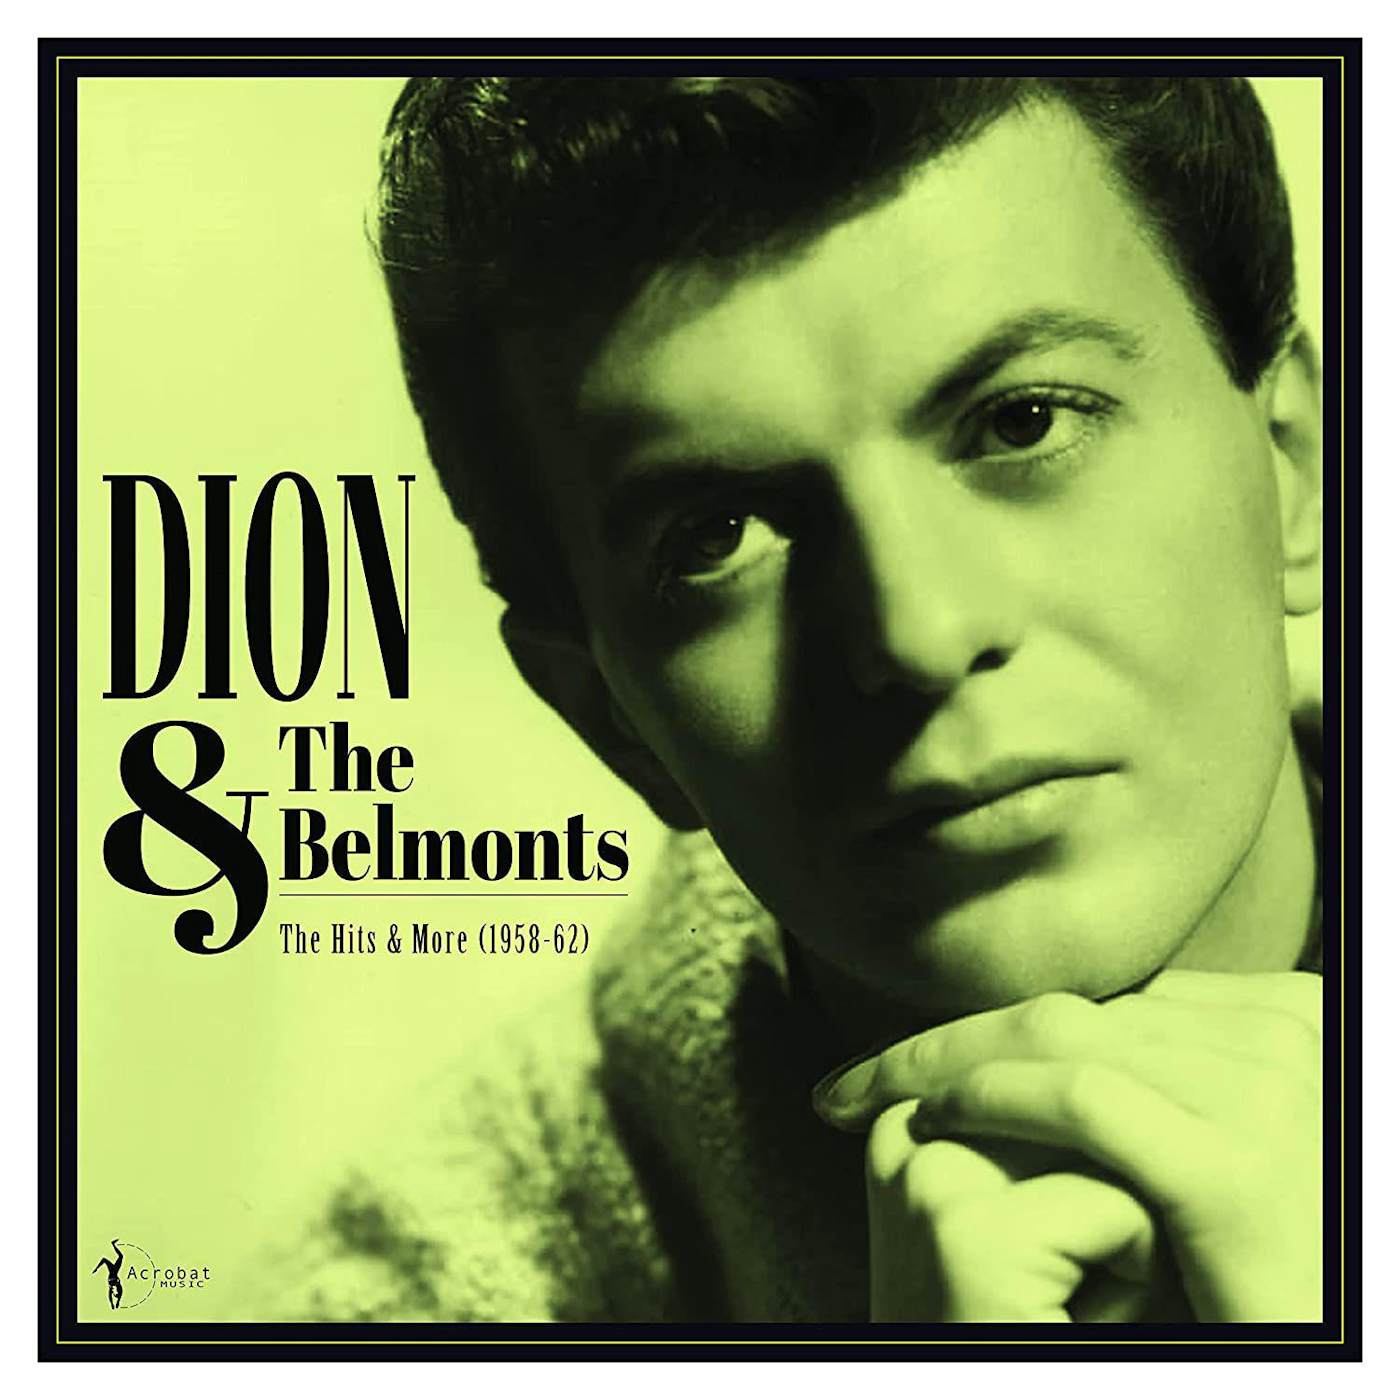 The Hits & More: Dion & The Belmonts 1958-62 Vinyl Record